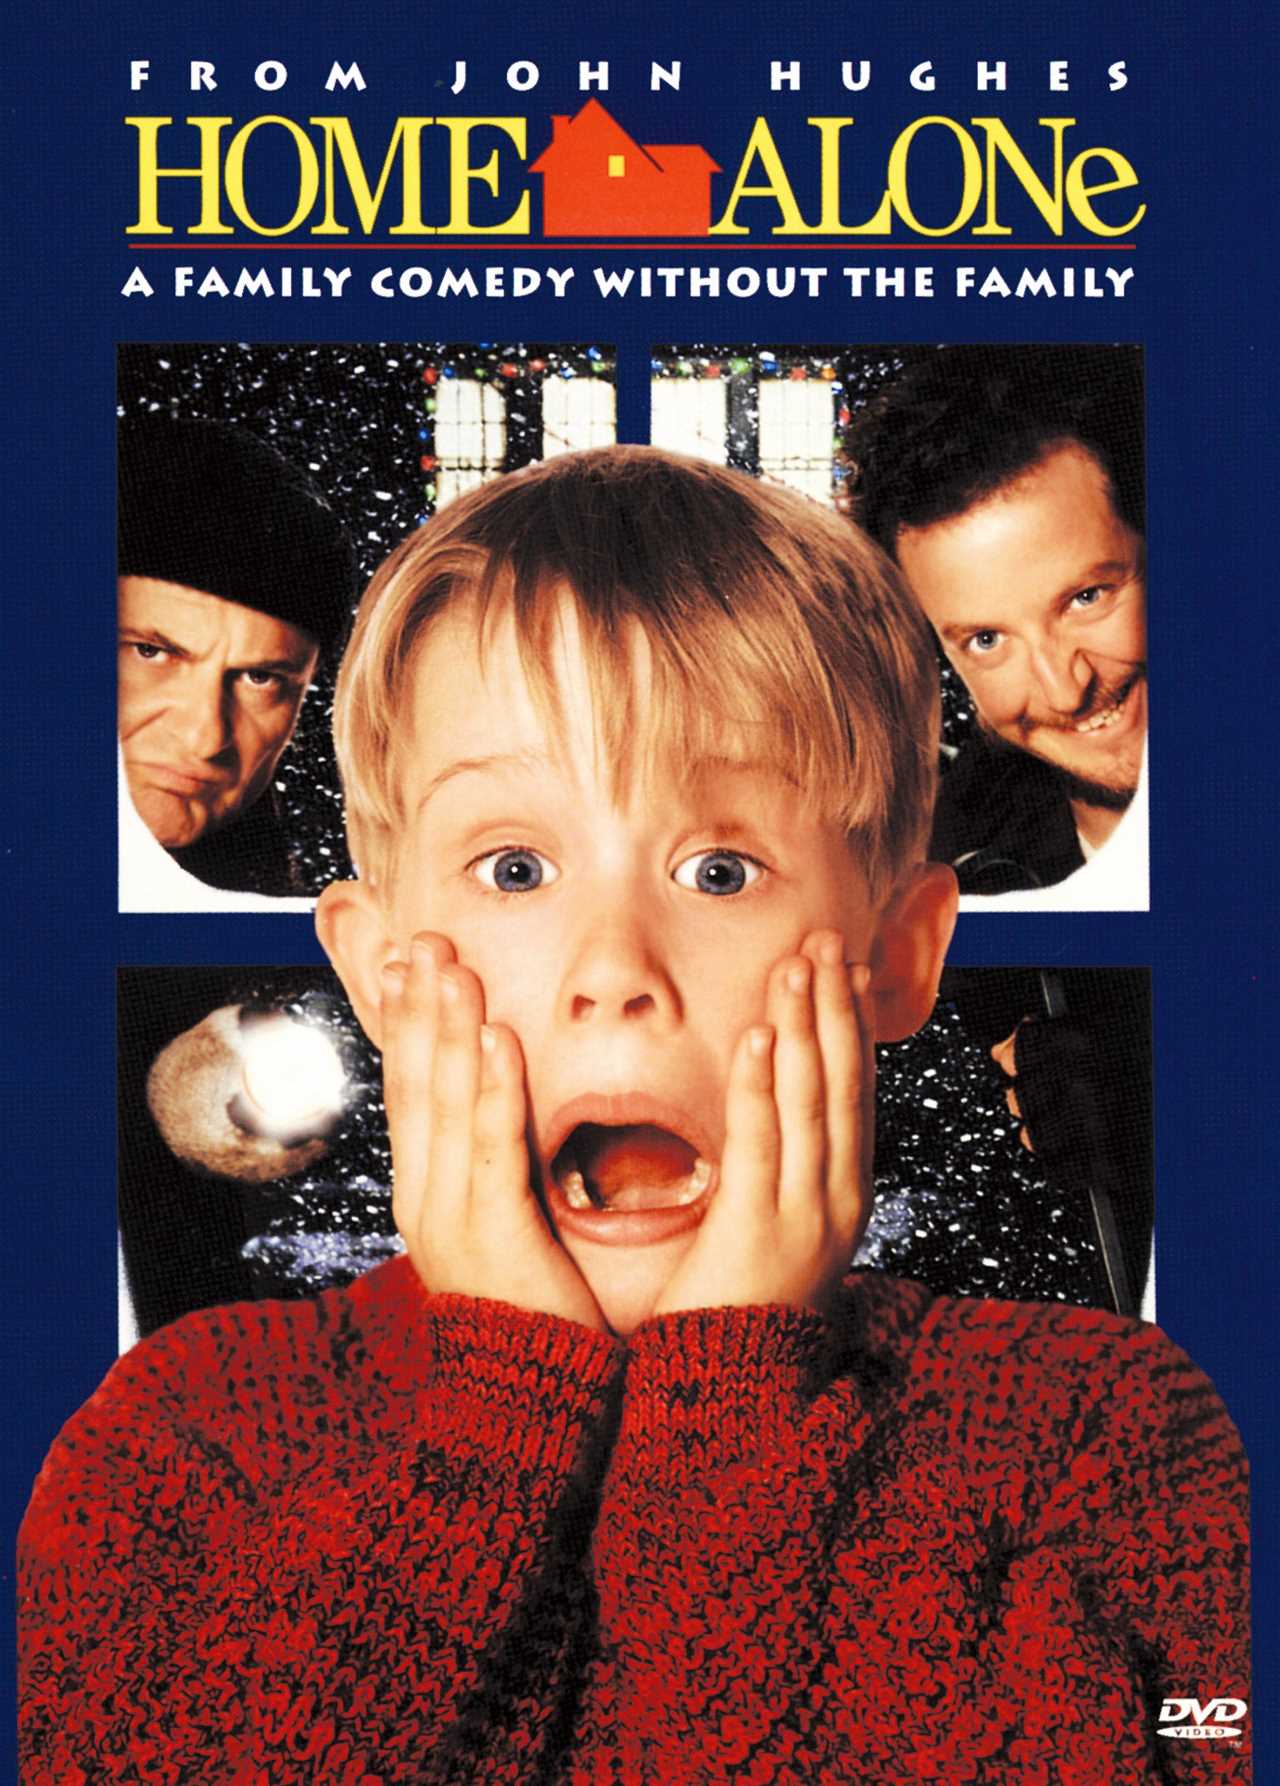 When is Home Alone on TV this Christmas, is it on Netflix